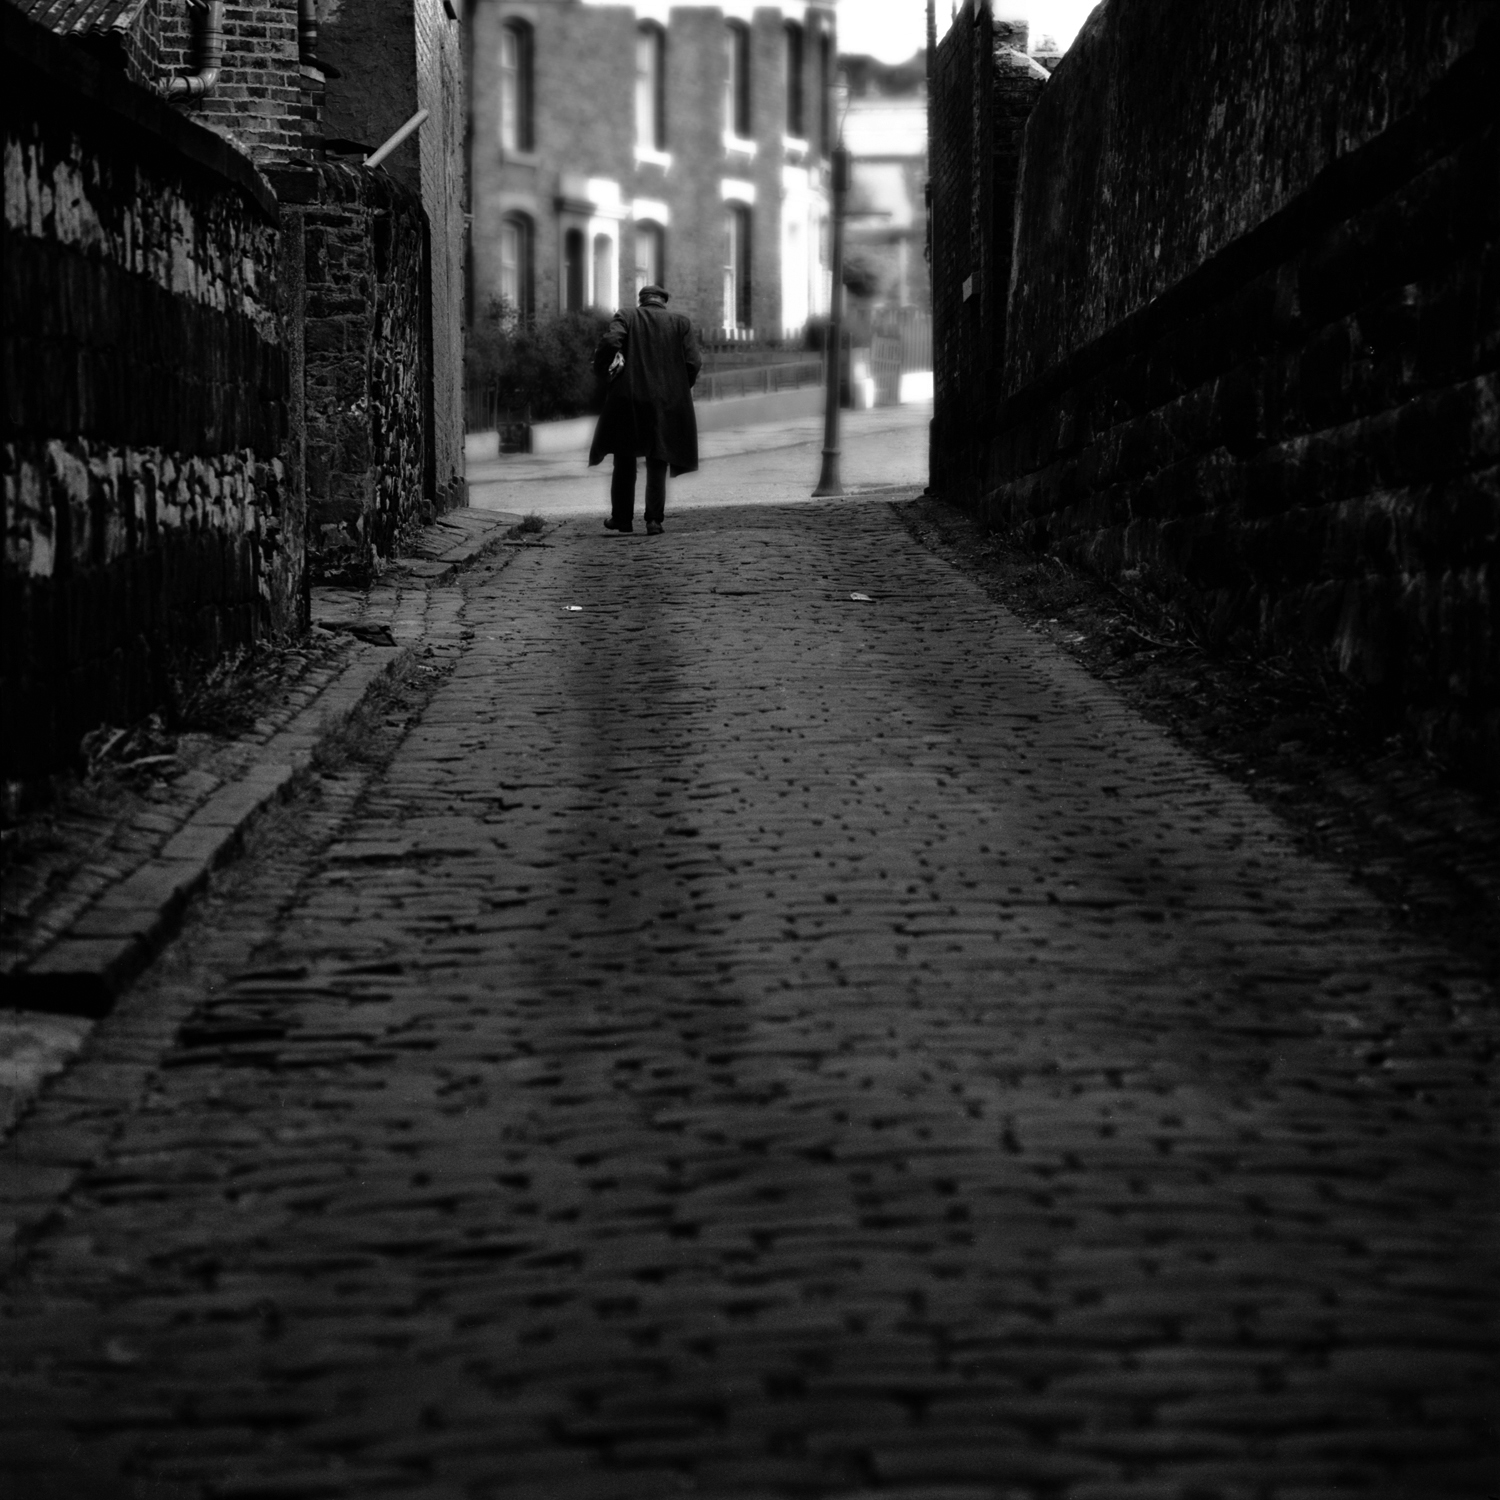 16. man walking home from work, Potteries